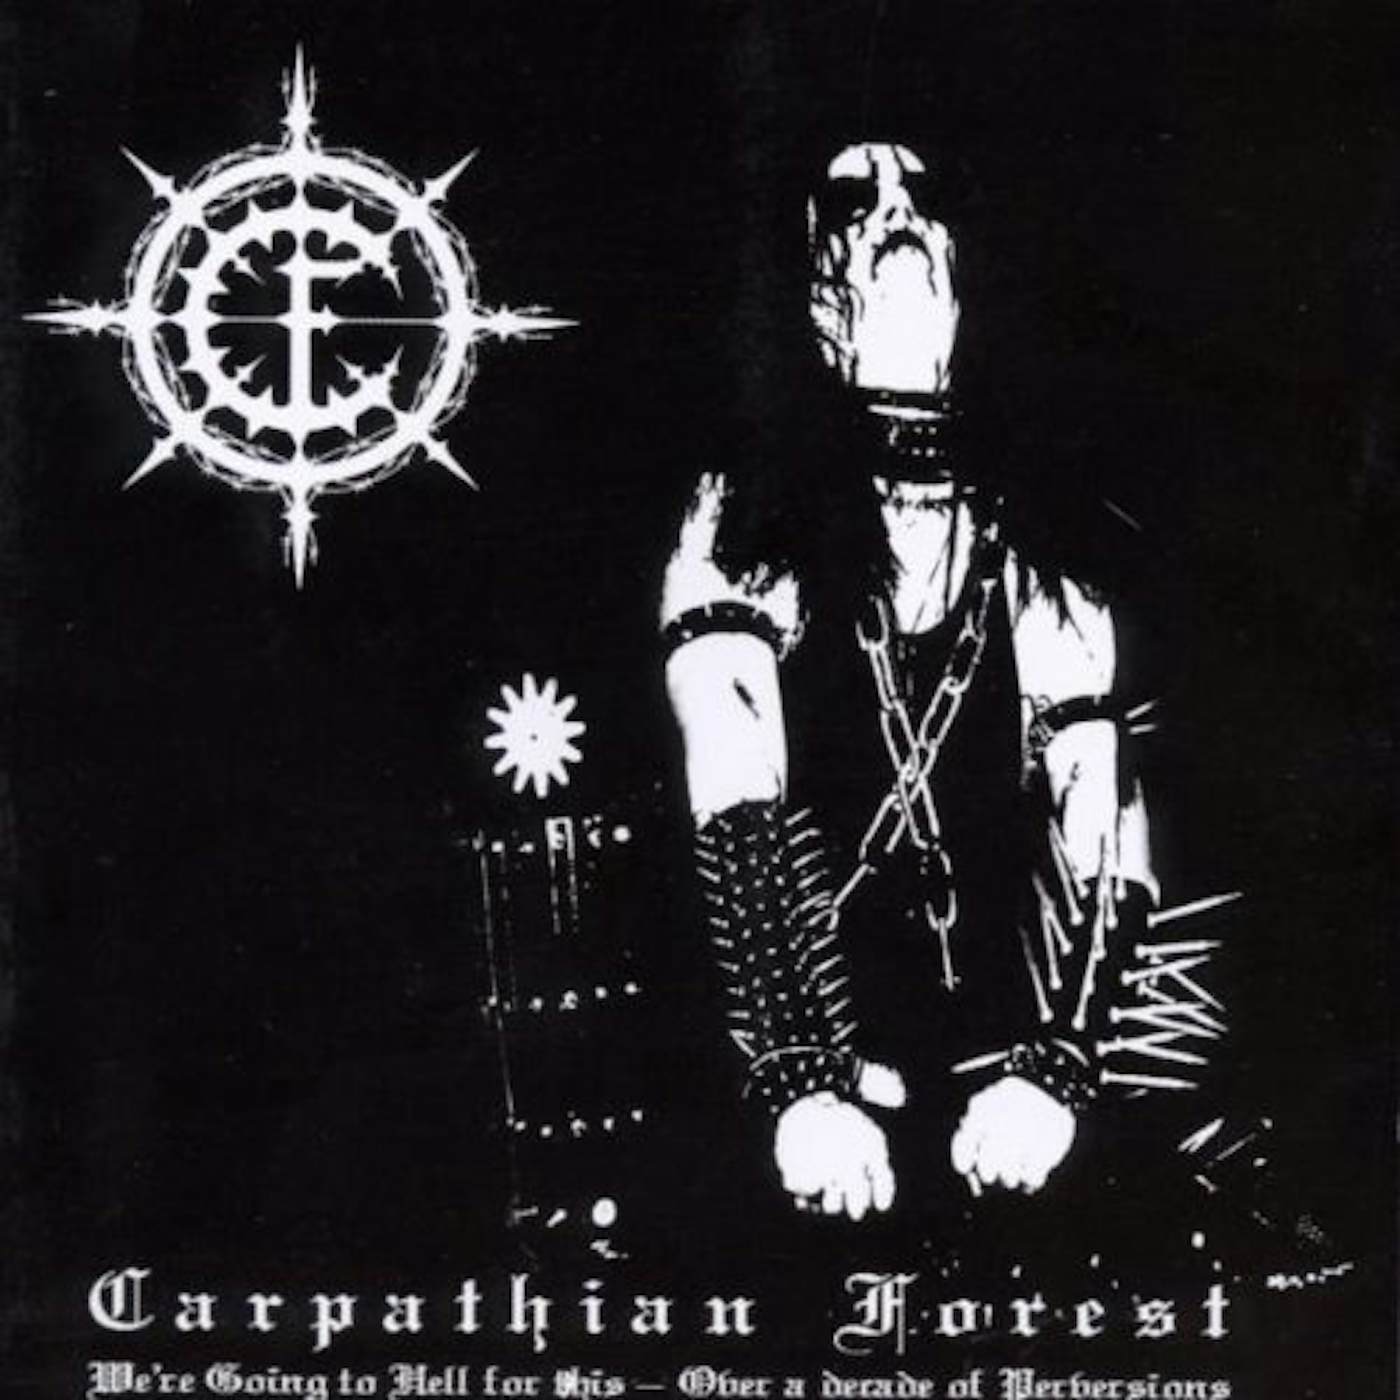 Carpathian Forest WE'RE GOING TO HELL FOR THIS Vinyl Record